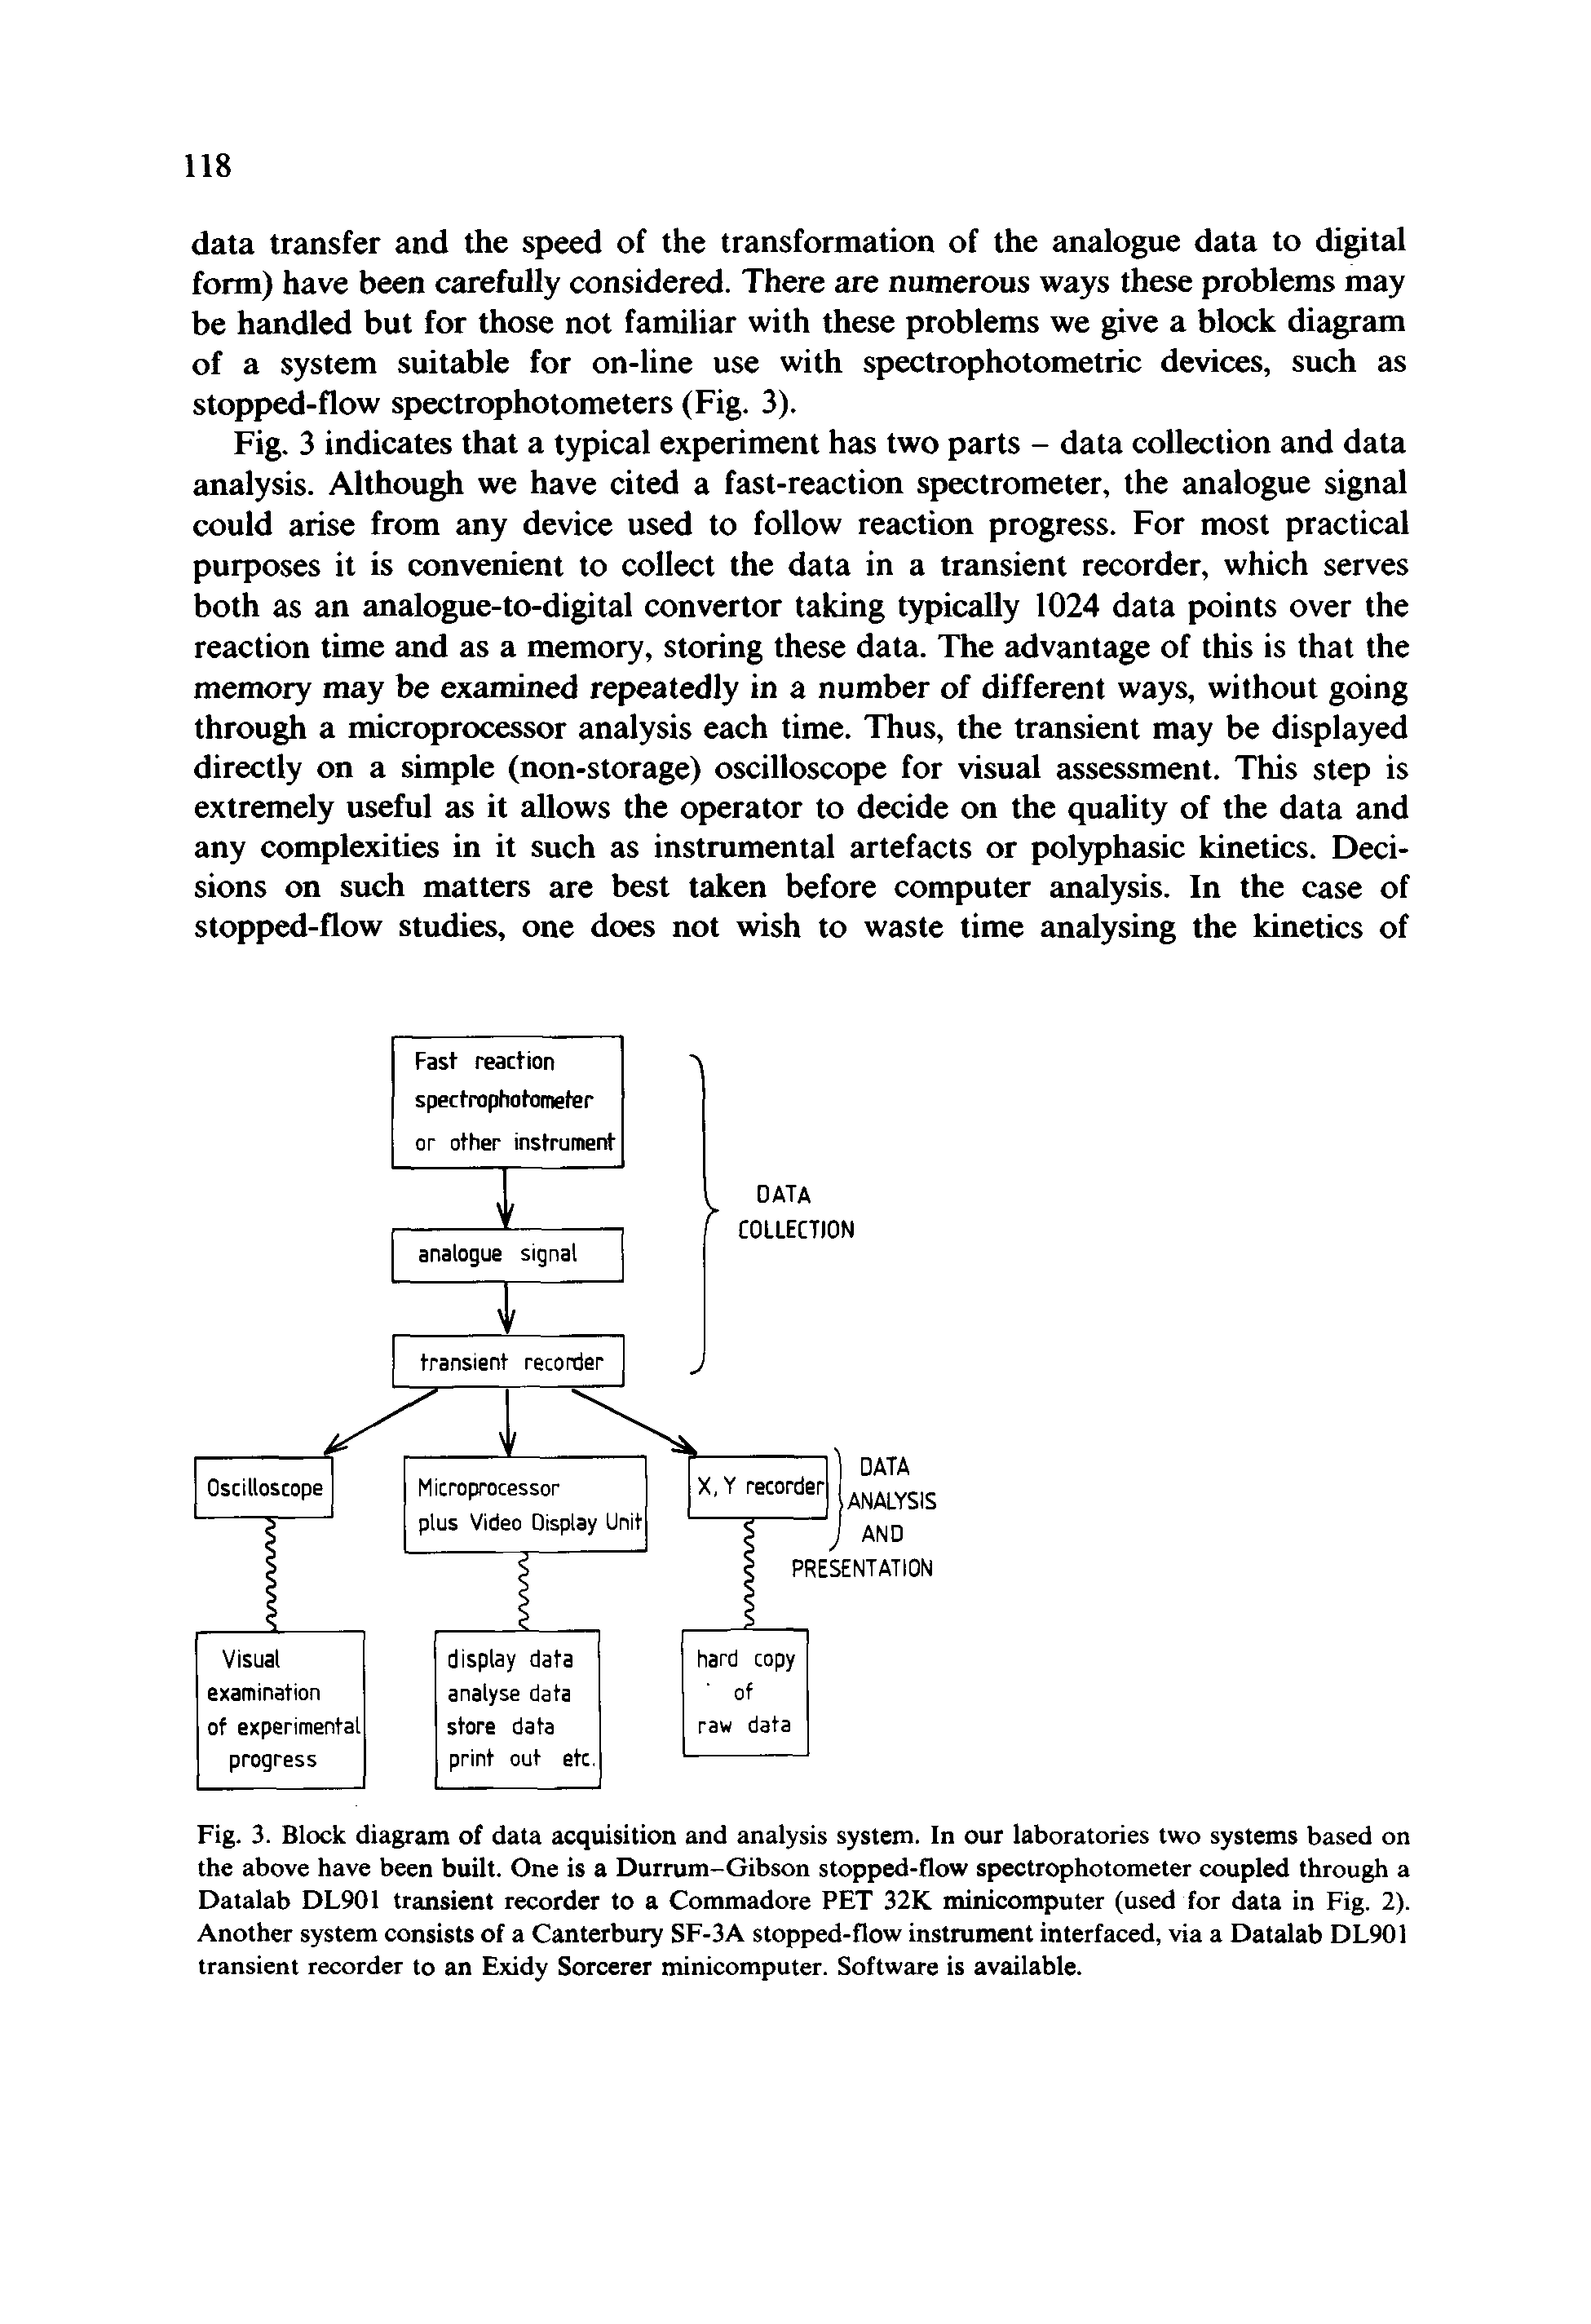 Fig. 3. Block diagram of data acquisition and analysis system. In our laboratories two systems based on the above have been built. One is a Durrum-Gibson stopped-flow spectrophotometer coupled through a Datalab DL901 transient recorder to a Commadore PET 32K minicomputer (used for data in Fig. 2). Another system consists of a Canterbury SF-3A stopped-flow instrument interfaced, via a Datalab DL901 transient recorder to an Exidy Sorcerer minicomputer. Software is available.